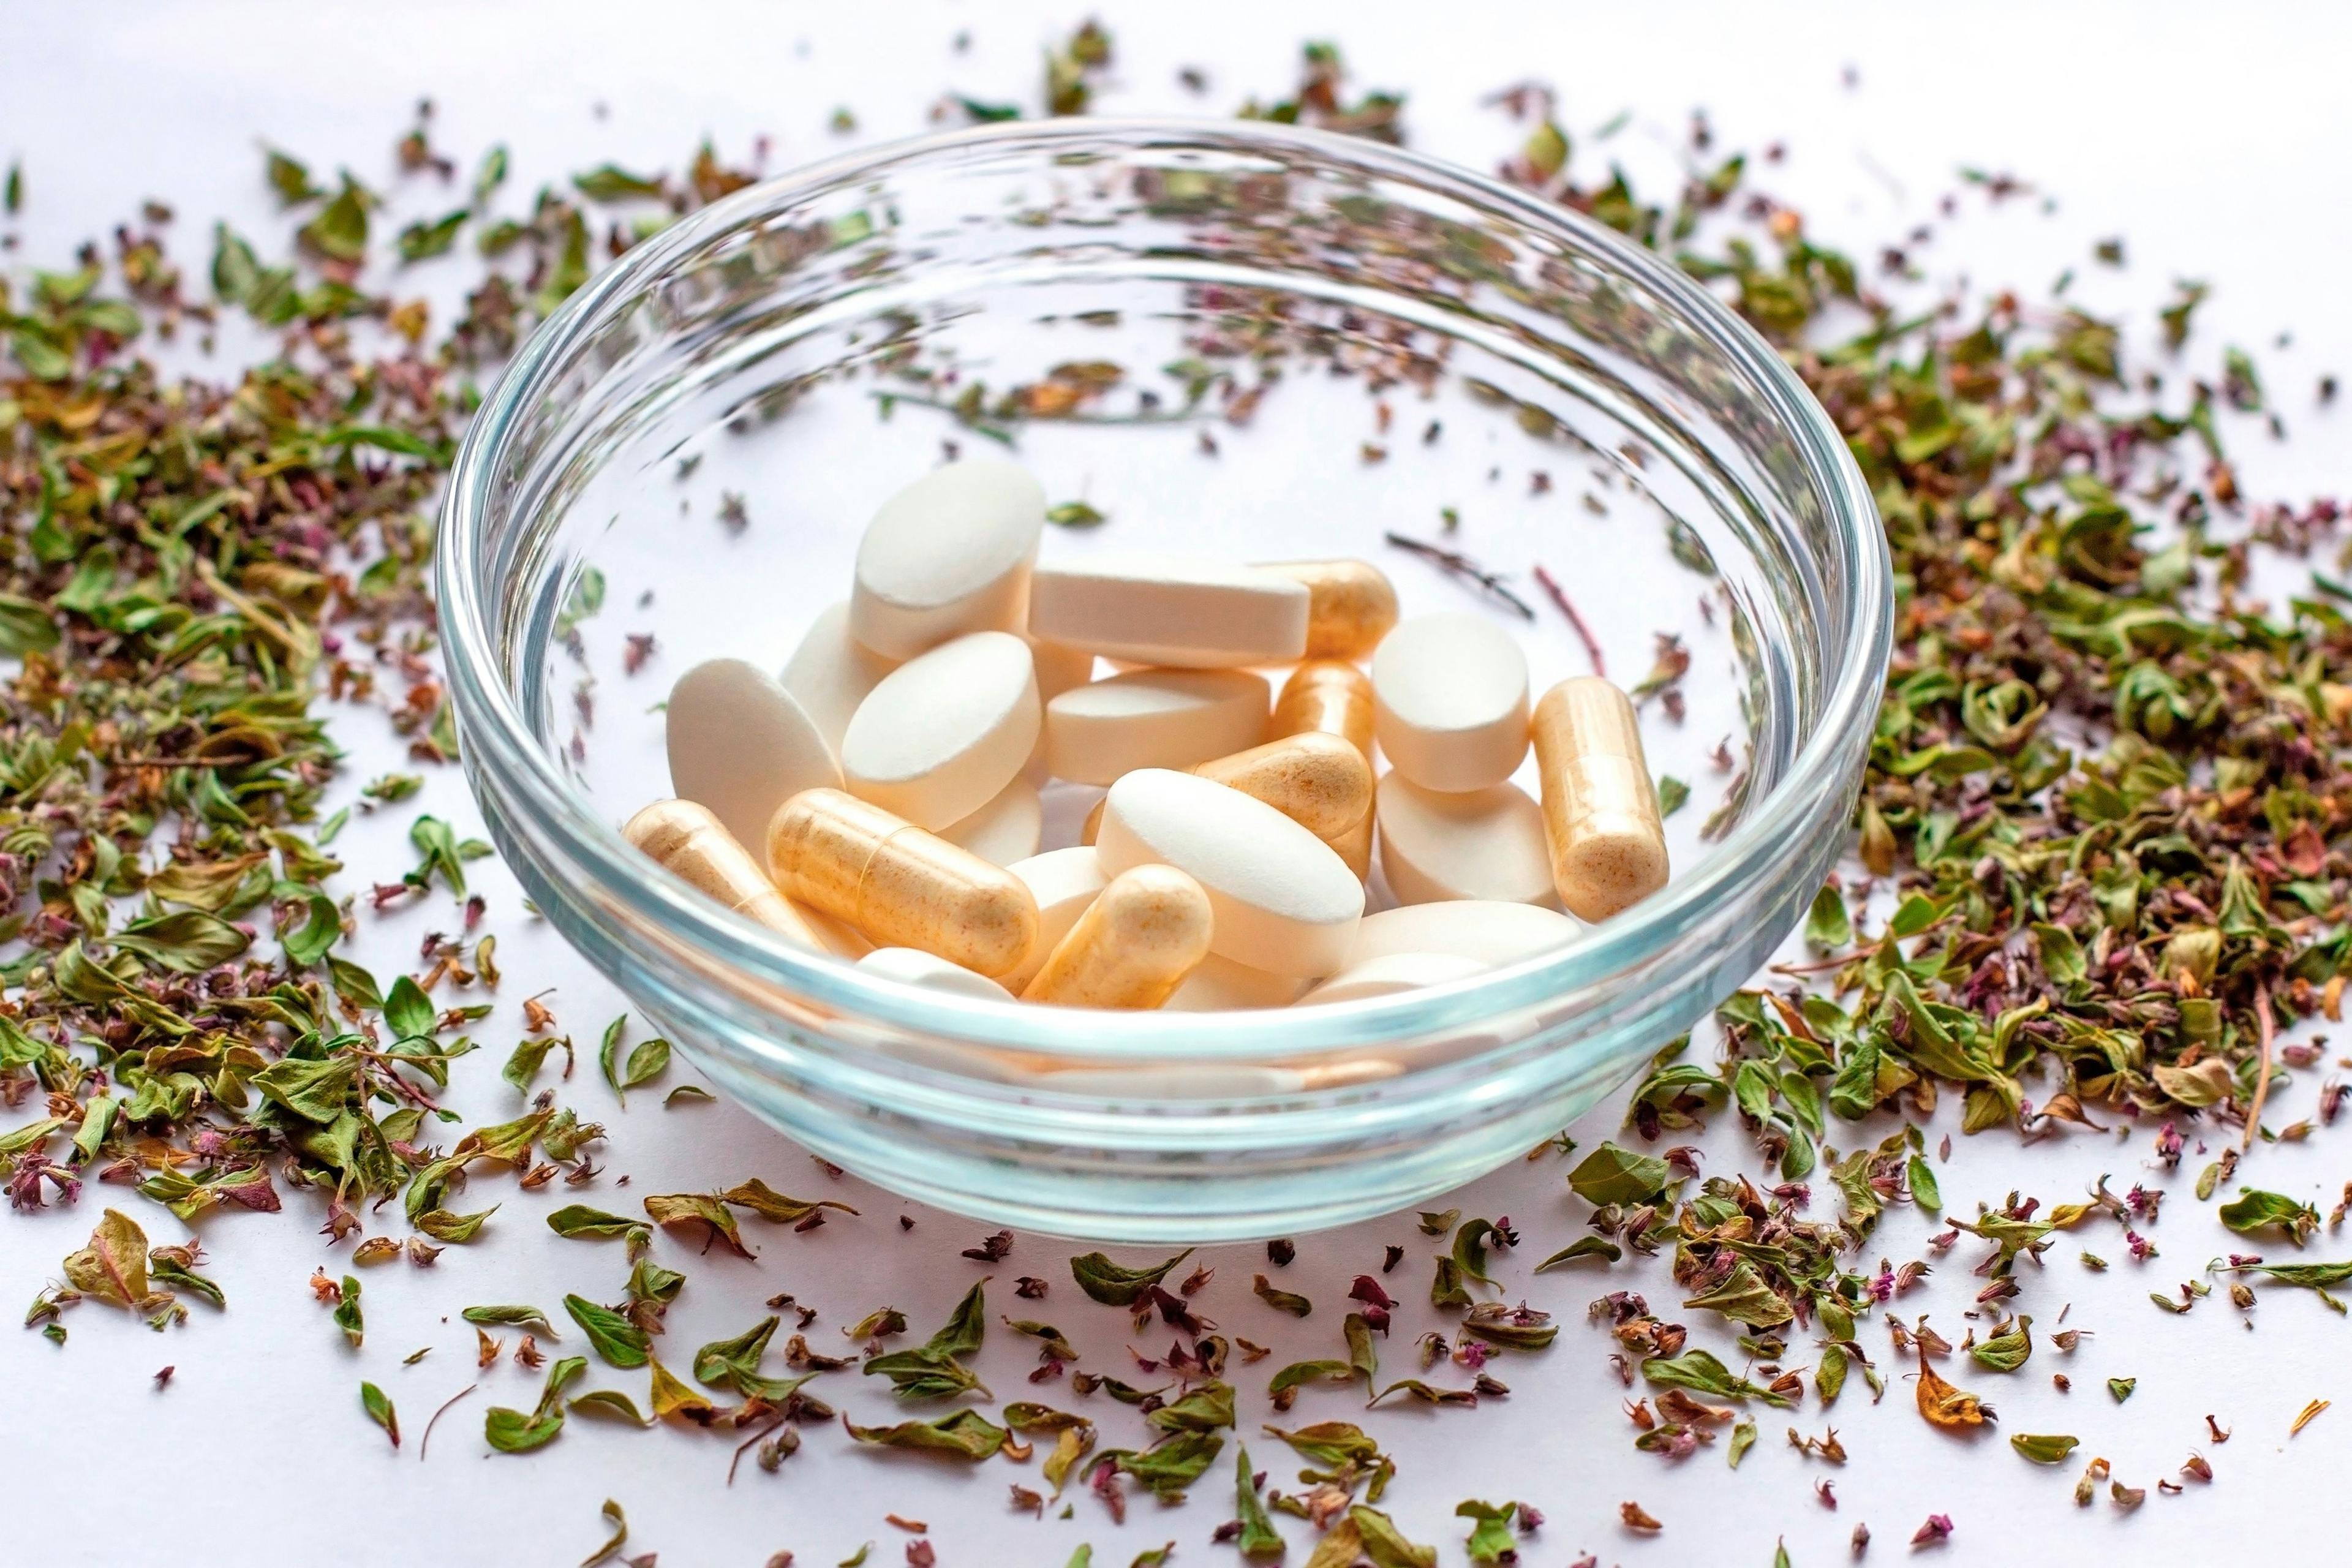 Nearly 90 Percent of PsA Patients Use Complimentary or Alternative Medicines